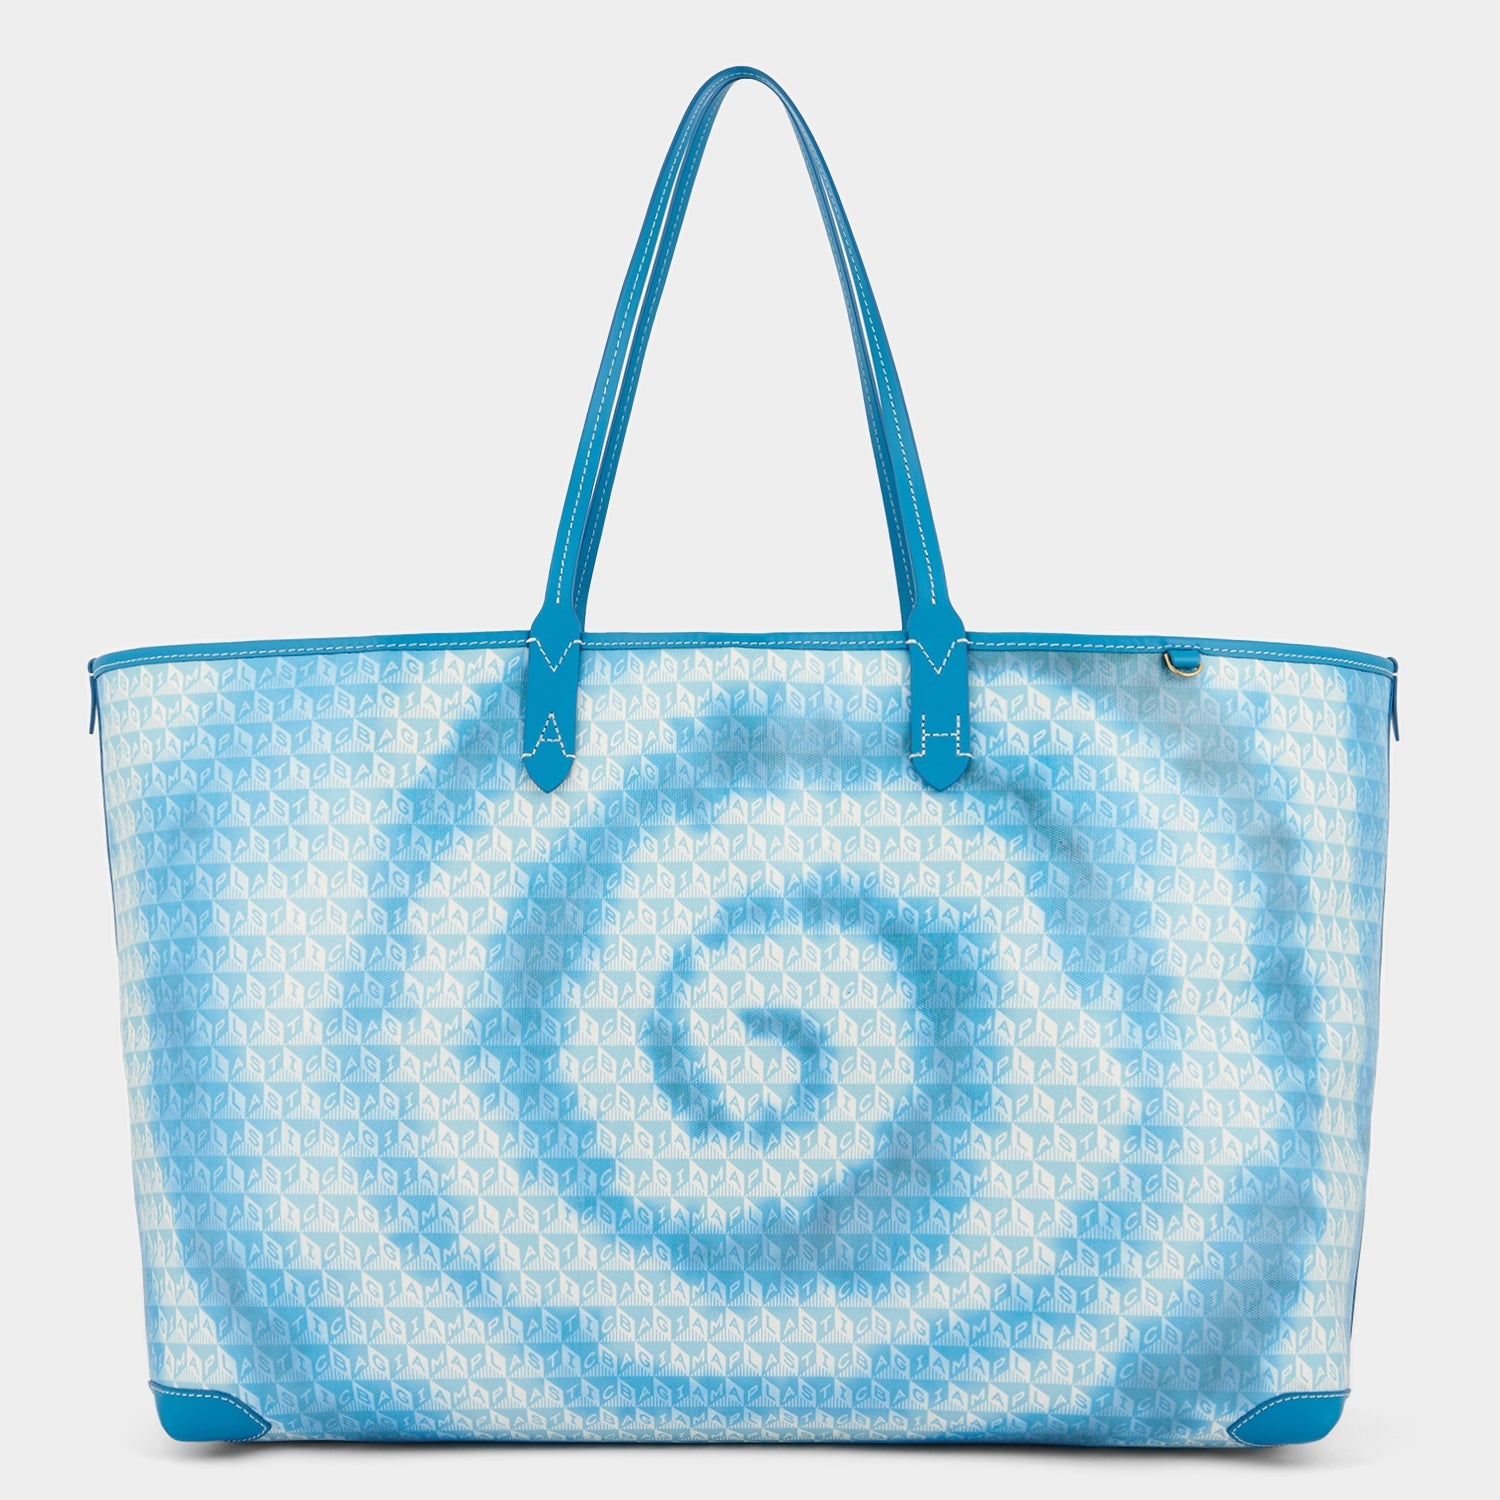 I am a Plastic Bag XL Tie Dye Tote -

                  
                    Recycled Canvas in Peacock -
                  

                  Anya Hindmarch US
